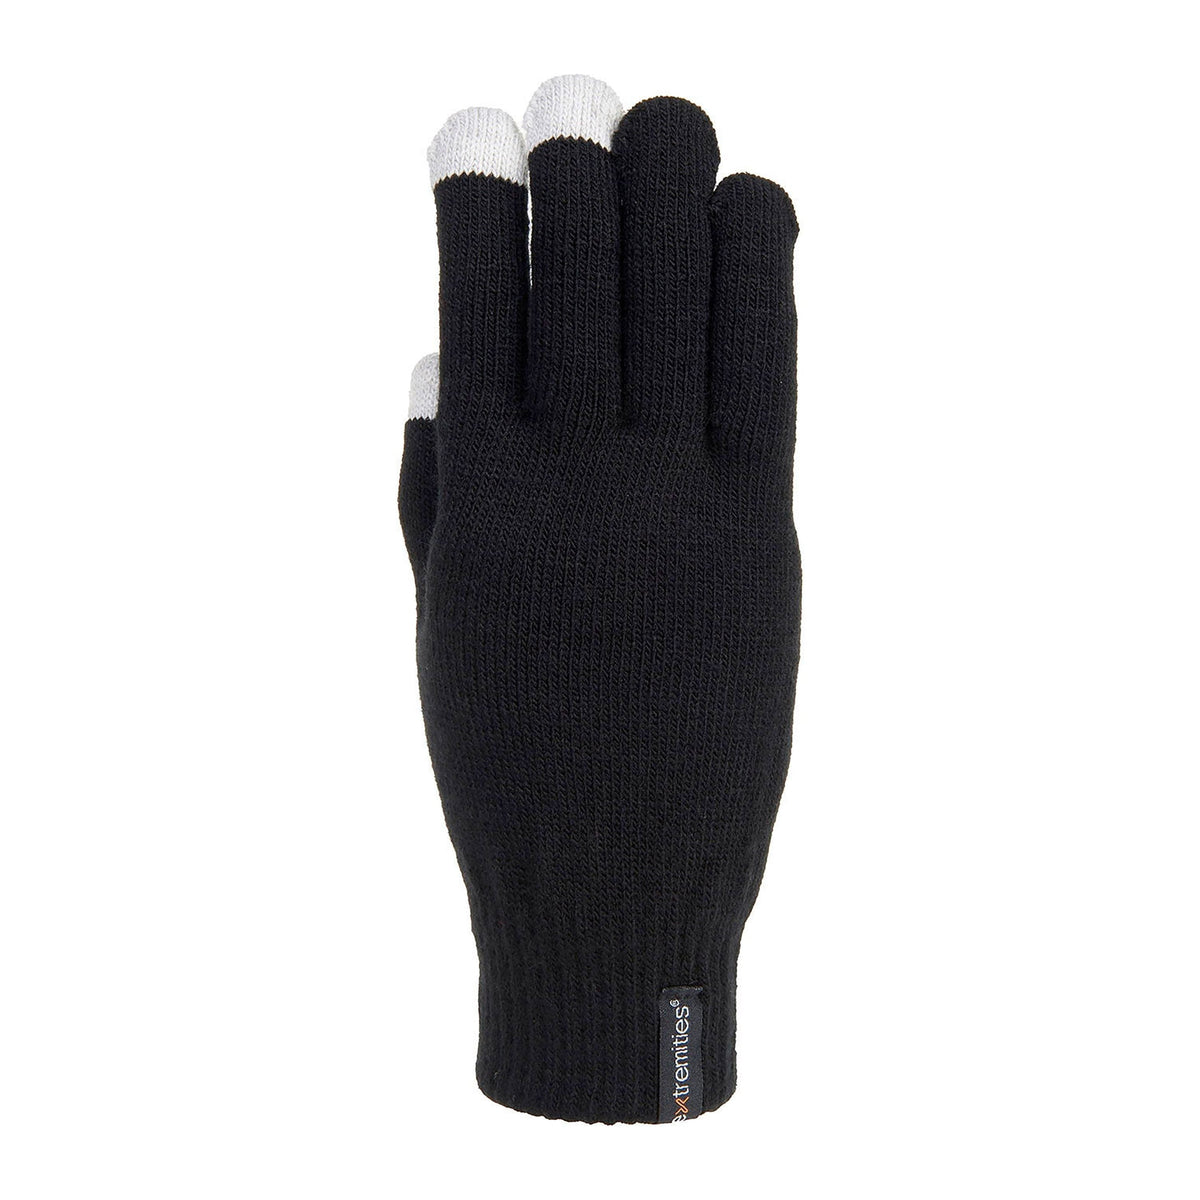 Extremities Thinny Touch Glove - Black - One Size